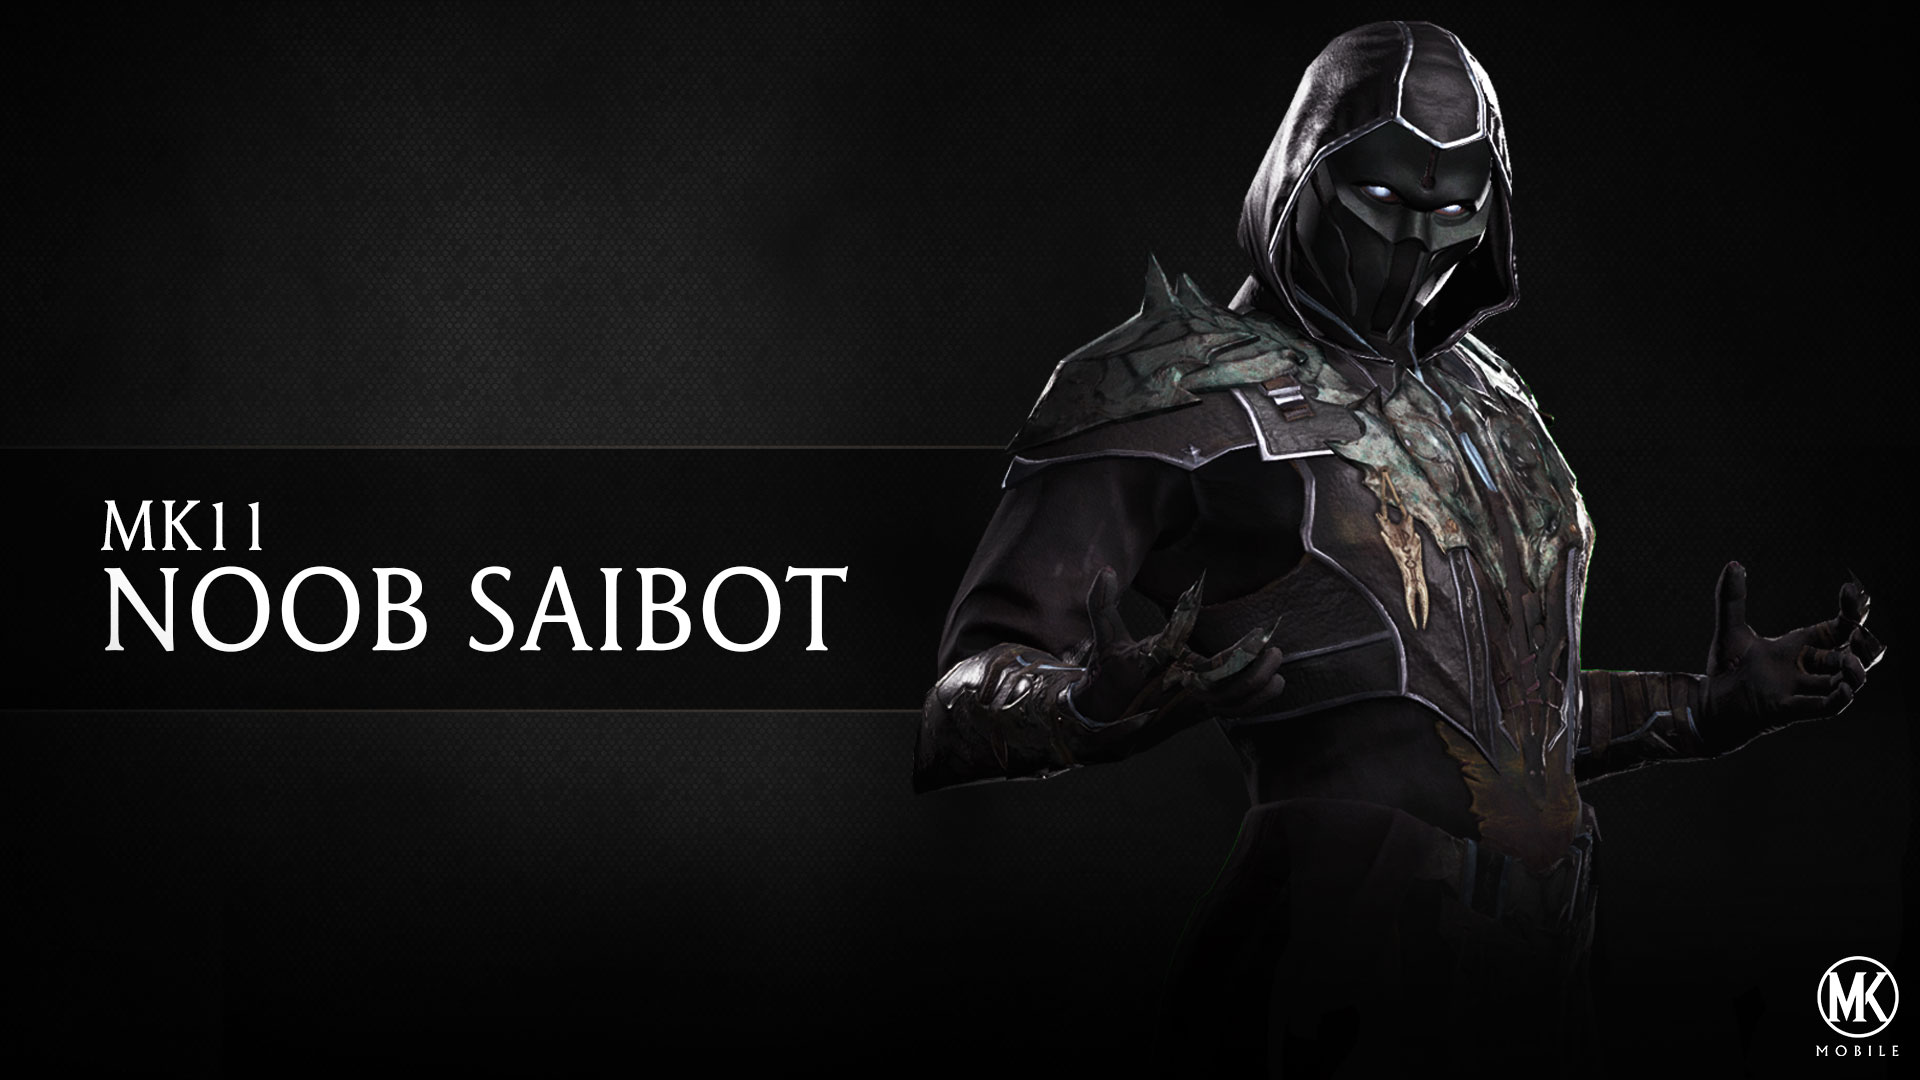 Latest Mortal Kombat Mobile Update Adds MK11 Noob Saibot Character, New Mode, and More